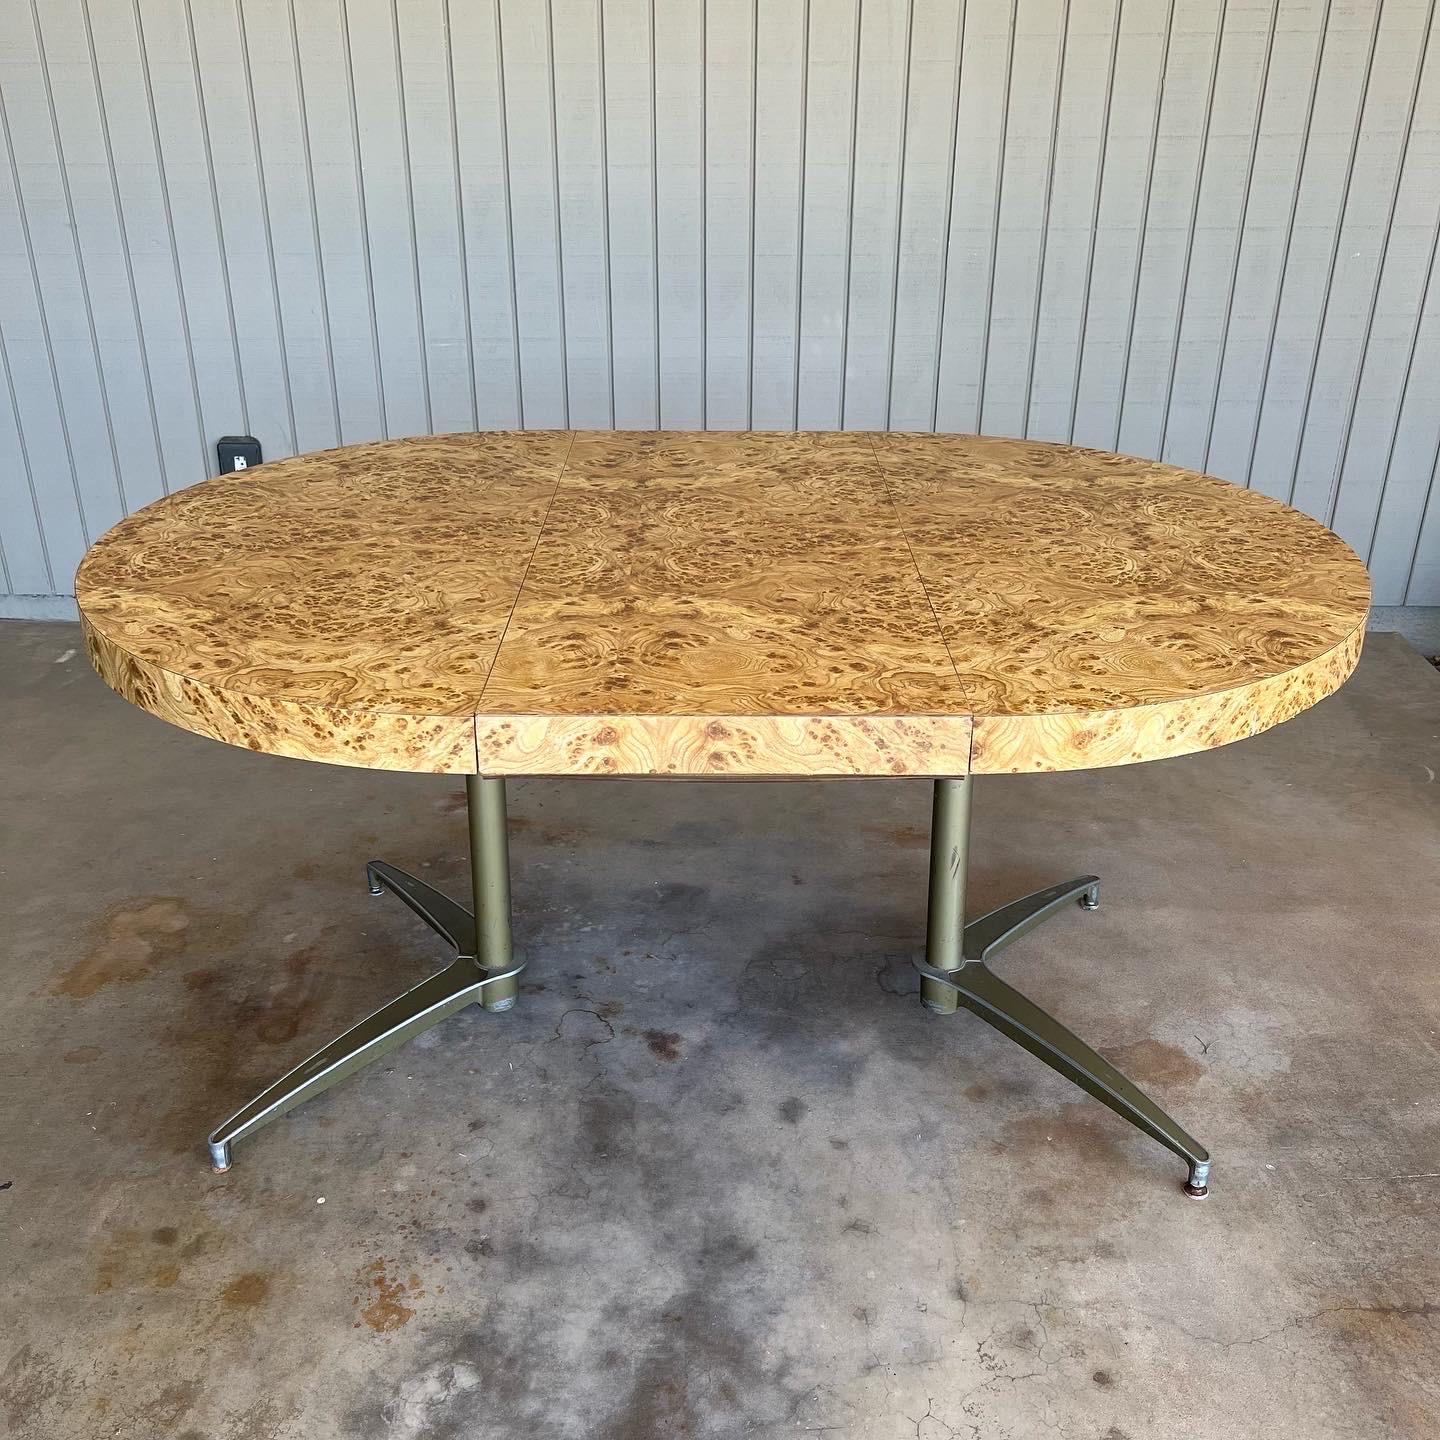 Burl wood veneer dining table with metal legs. In the style of Milo Baughman. Maker and designer unknown. Likely 1970s. It could be used as mid century modern, post modern, contemporary or Hollywood regency decor. The table is round or extendable to